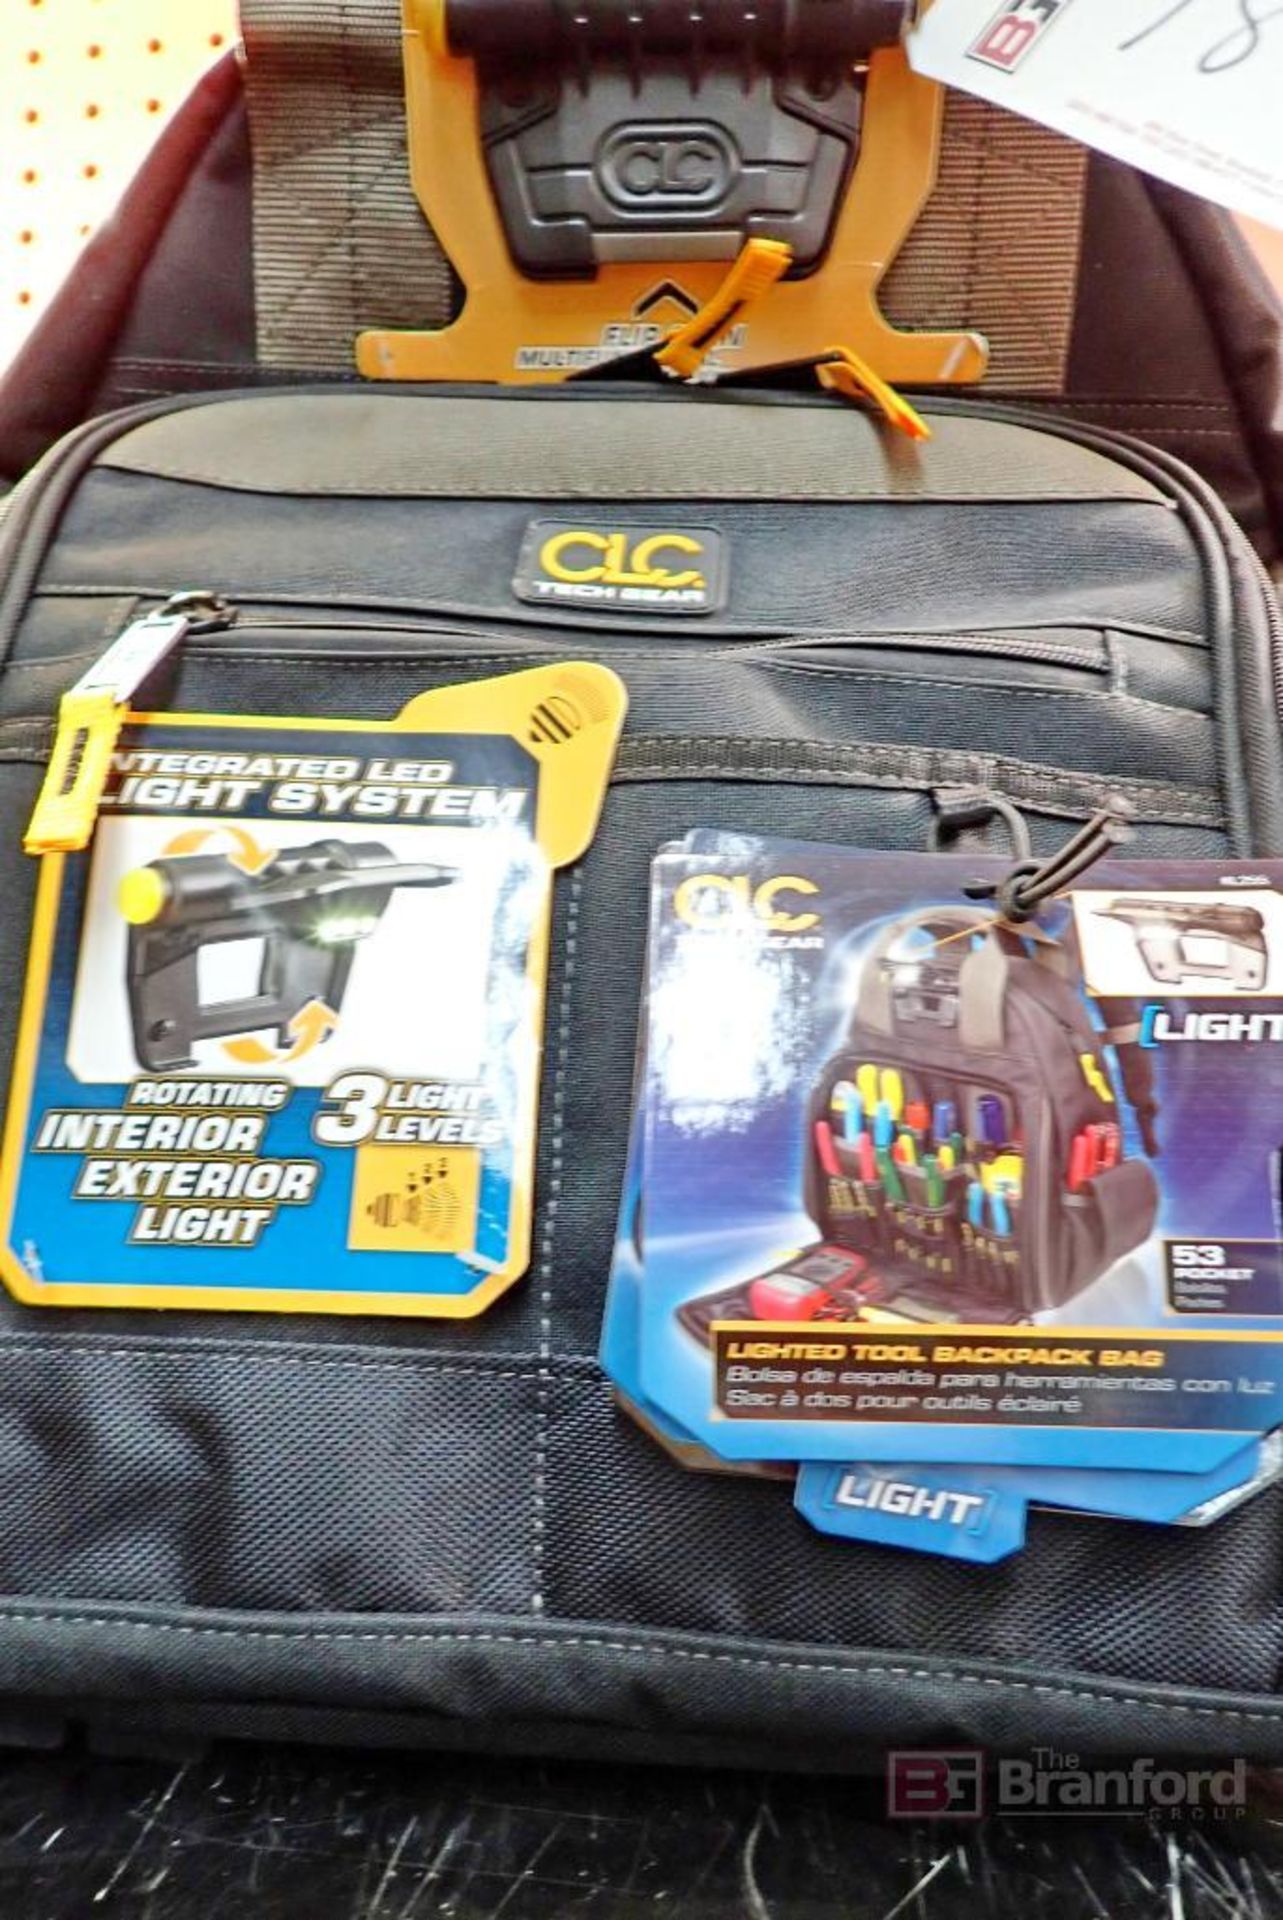 CLC Tech Gear USB Charging Tool Backpack - Image 2 of 4